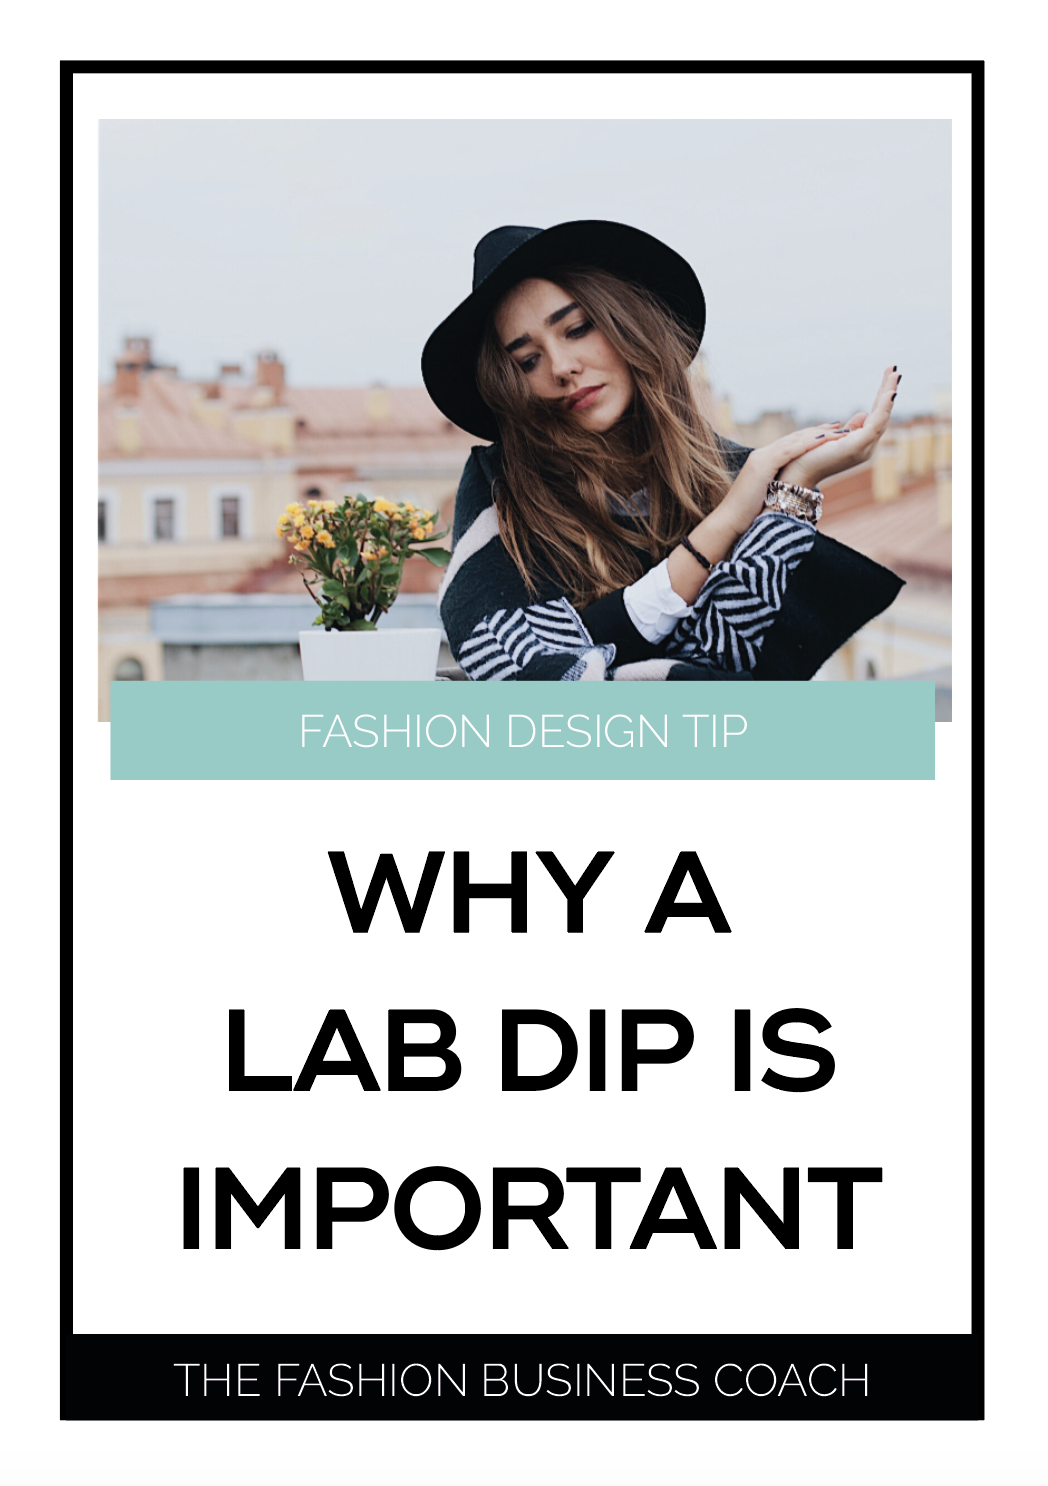 Fashion Design Tip - Why a Lab Dip is Important 1.png